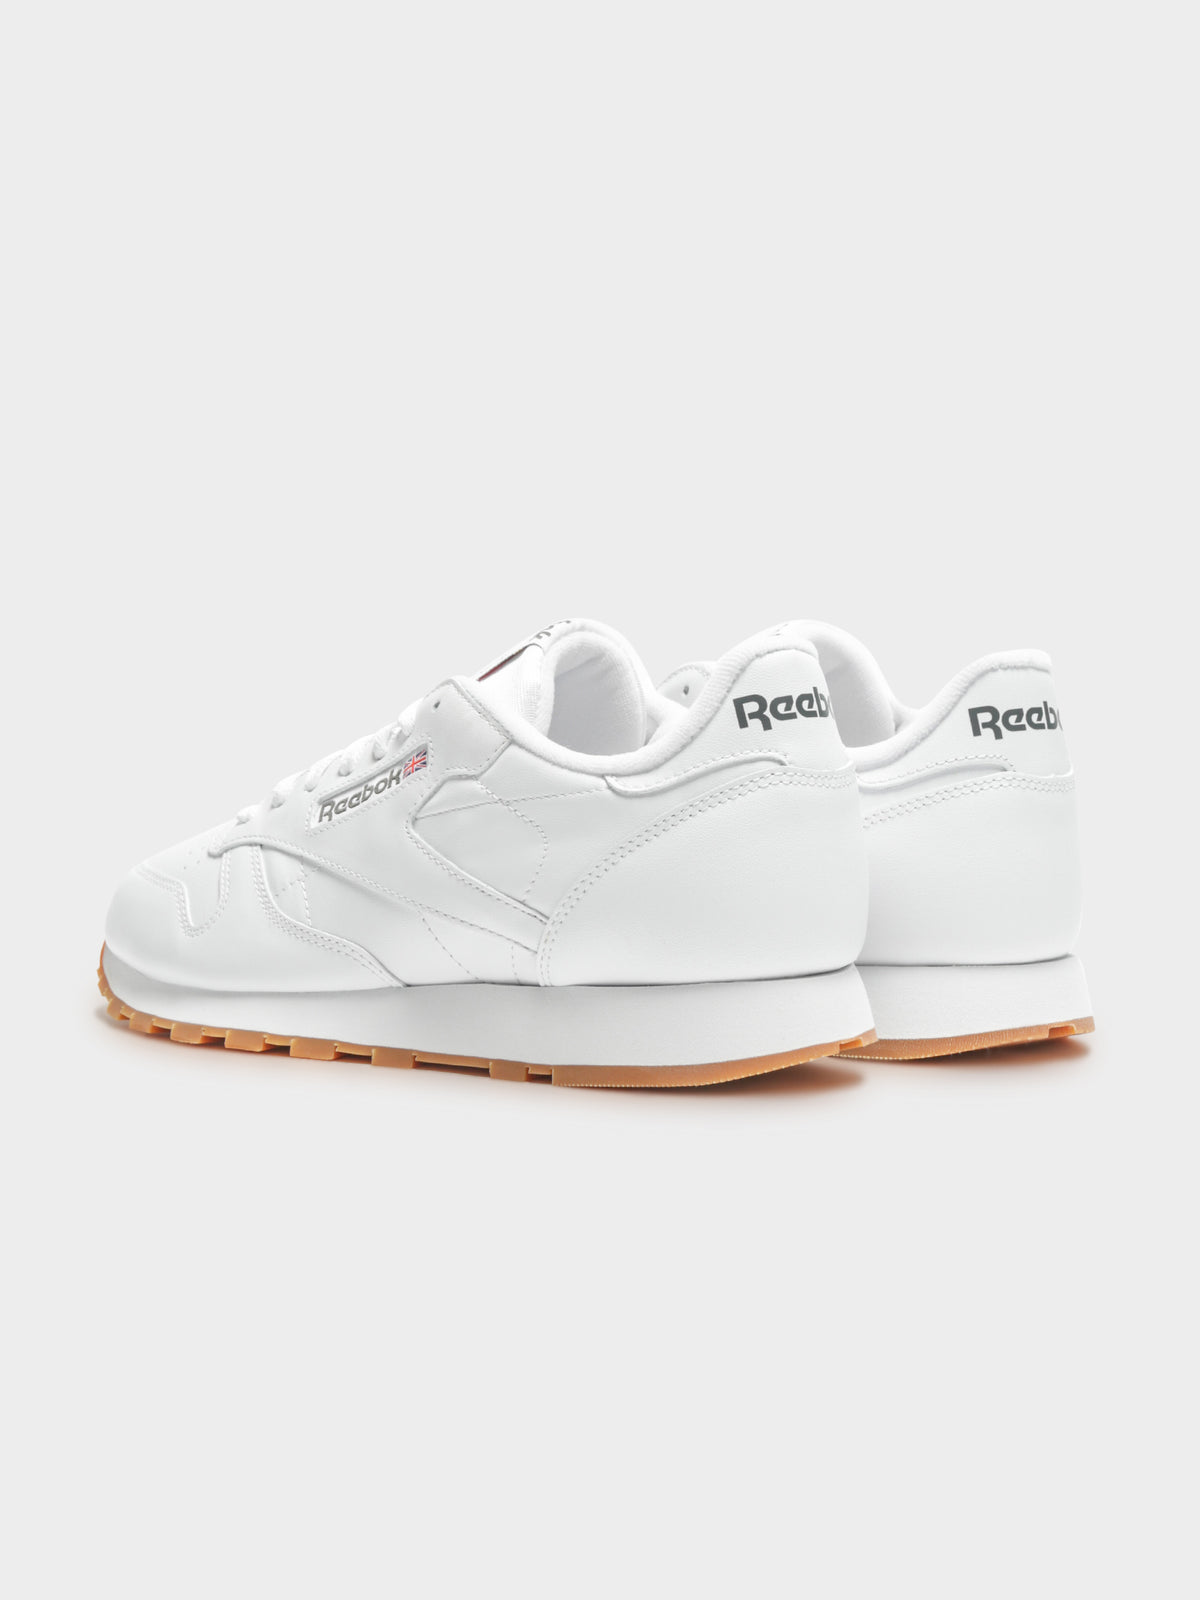 Unisex Classic Leather Sneaker in White